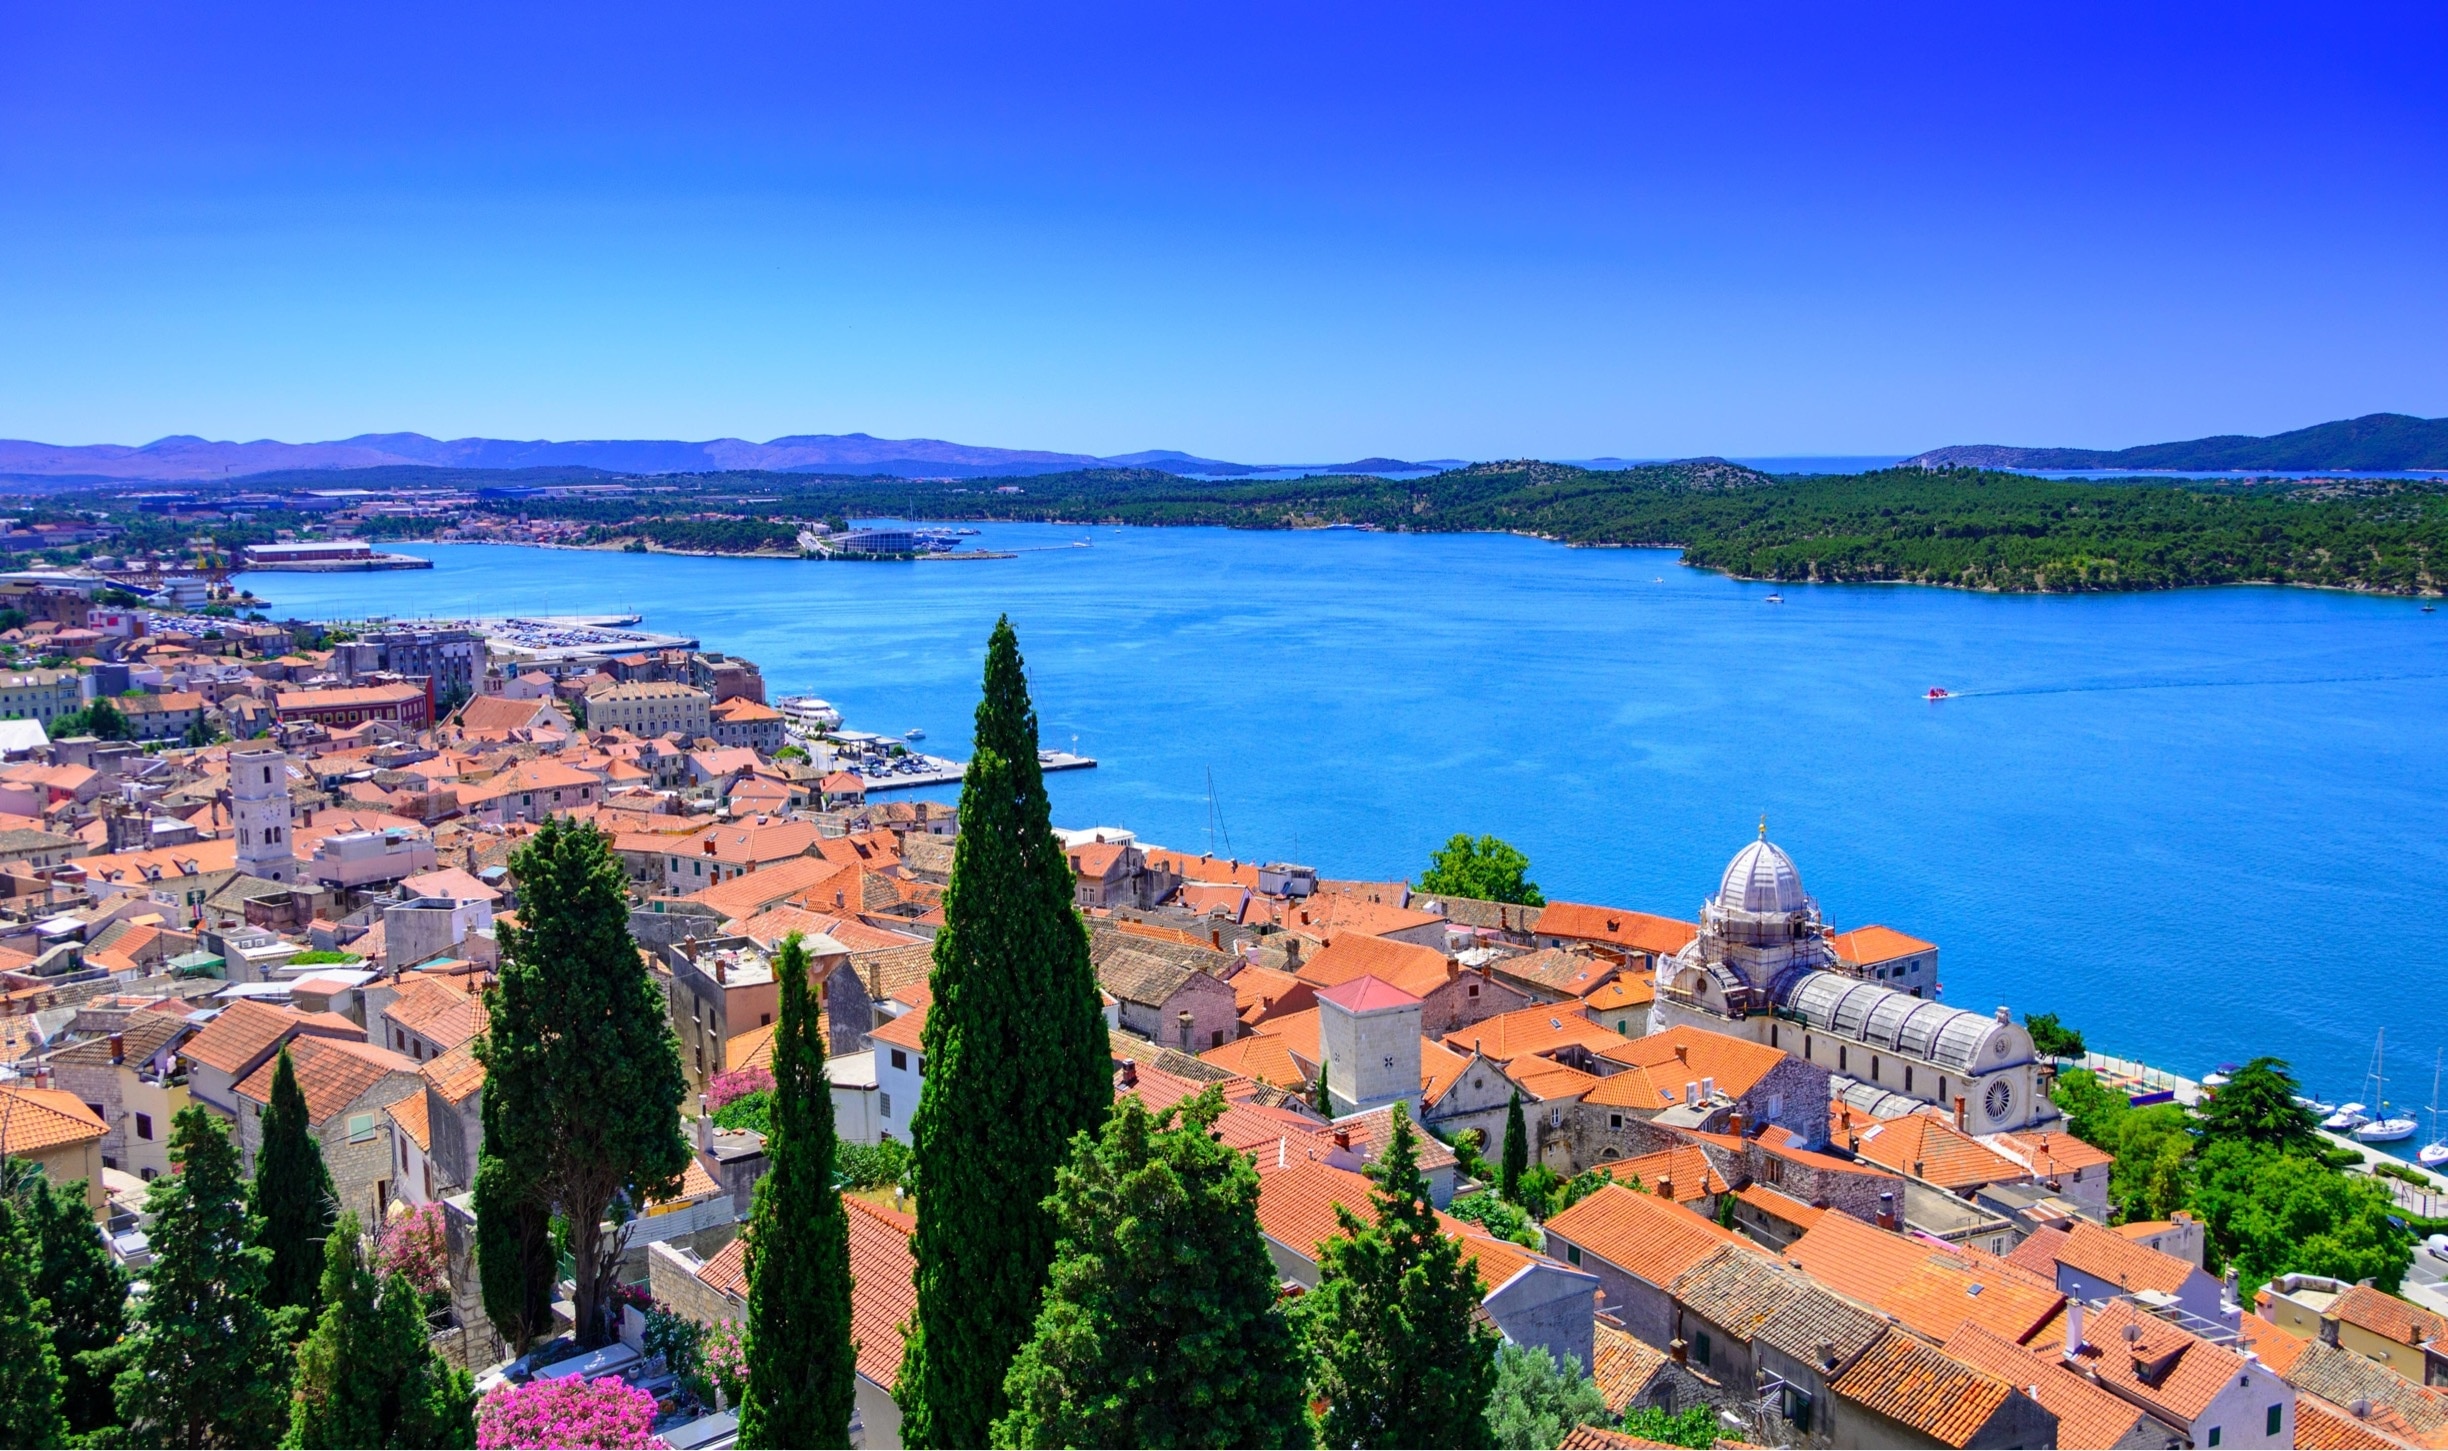 Cathedral of St James and Kanal-Luka in Šibenik, Croatia.  The cathedral was added to the list of UNESCO World Heritage Sites in 2000.  Photograph taken from St. Michael’s Fortress.